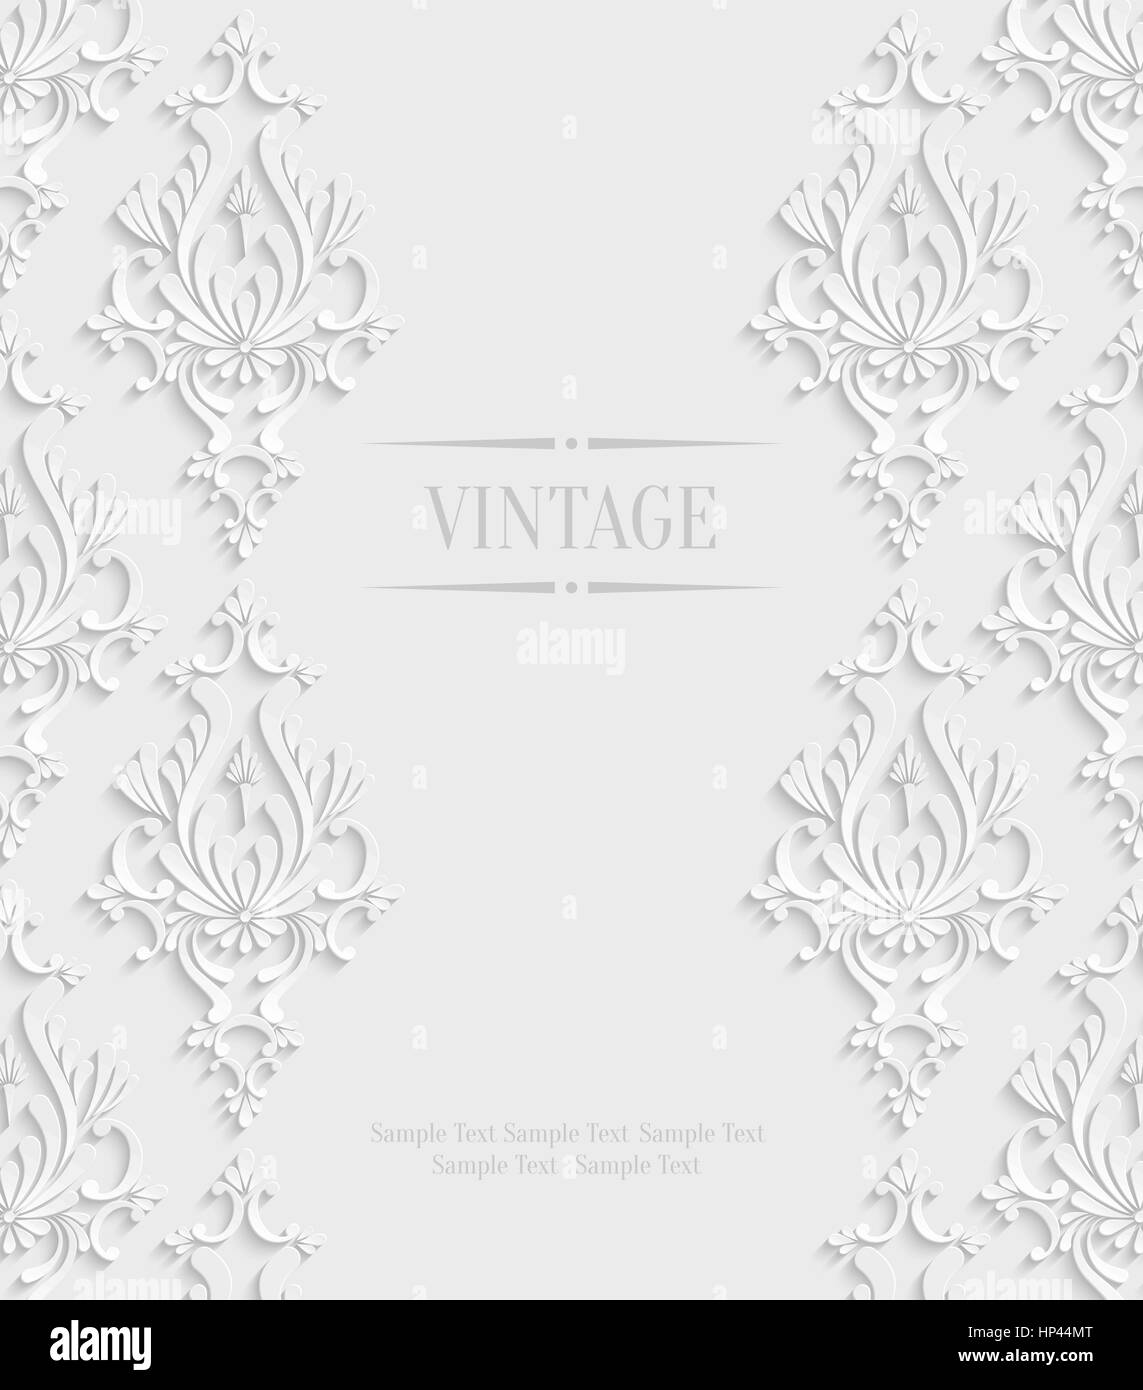 Vector 3d Vintage Wedding or Invitation Card with Floral Damask Pattern Stock Vector